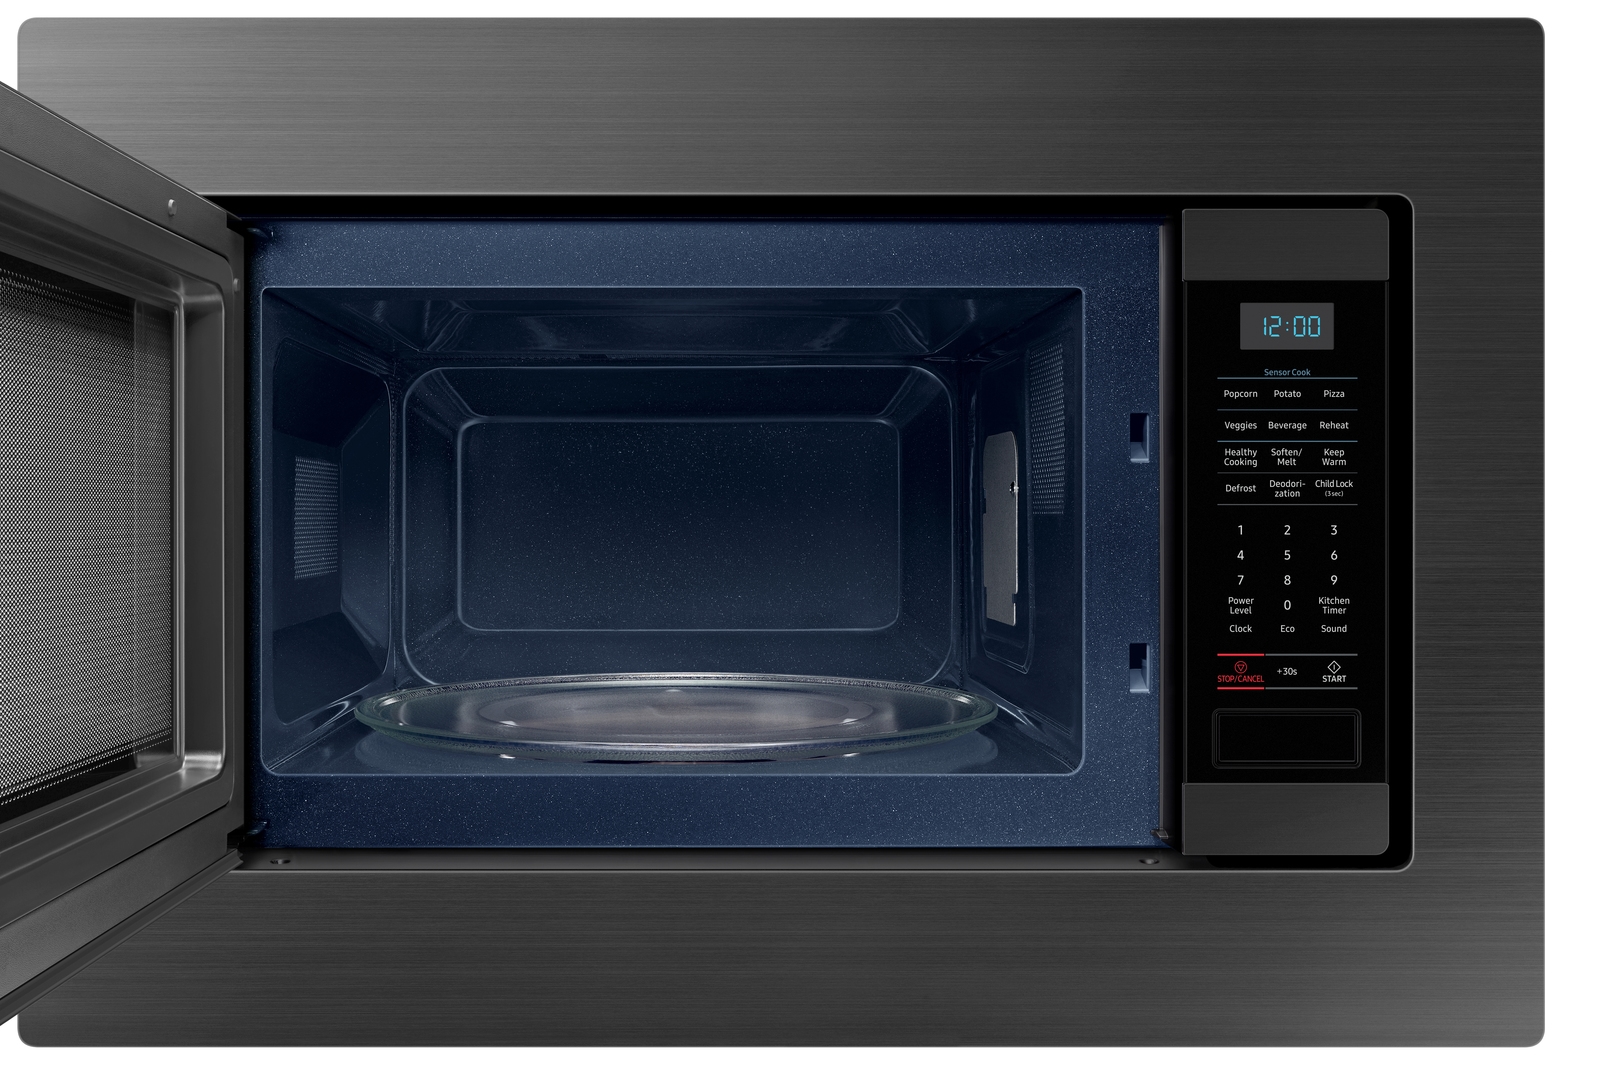 Thumbnail image of 1.9 cu. ft. Countertop Microwave for Built-In Application in Fingerprint Resistant Black Stainless Steel